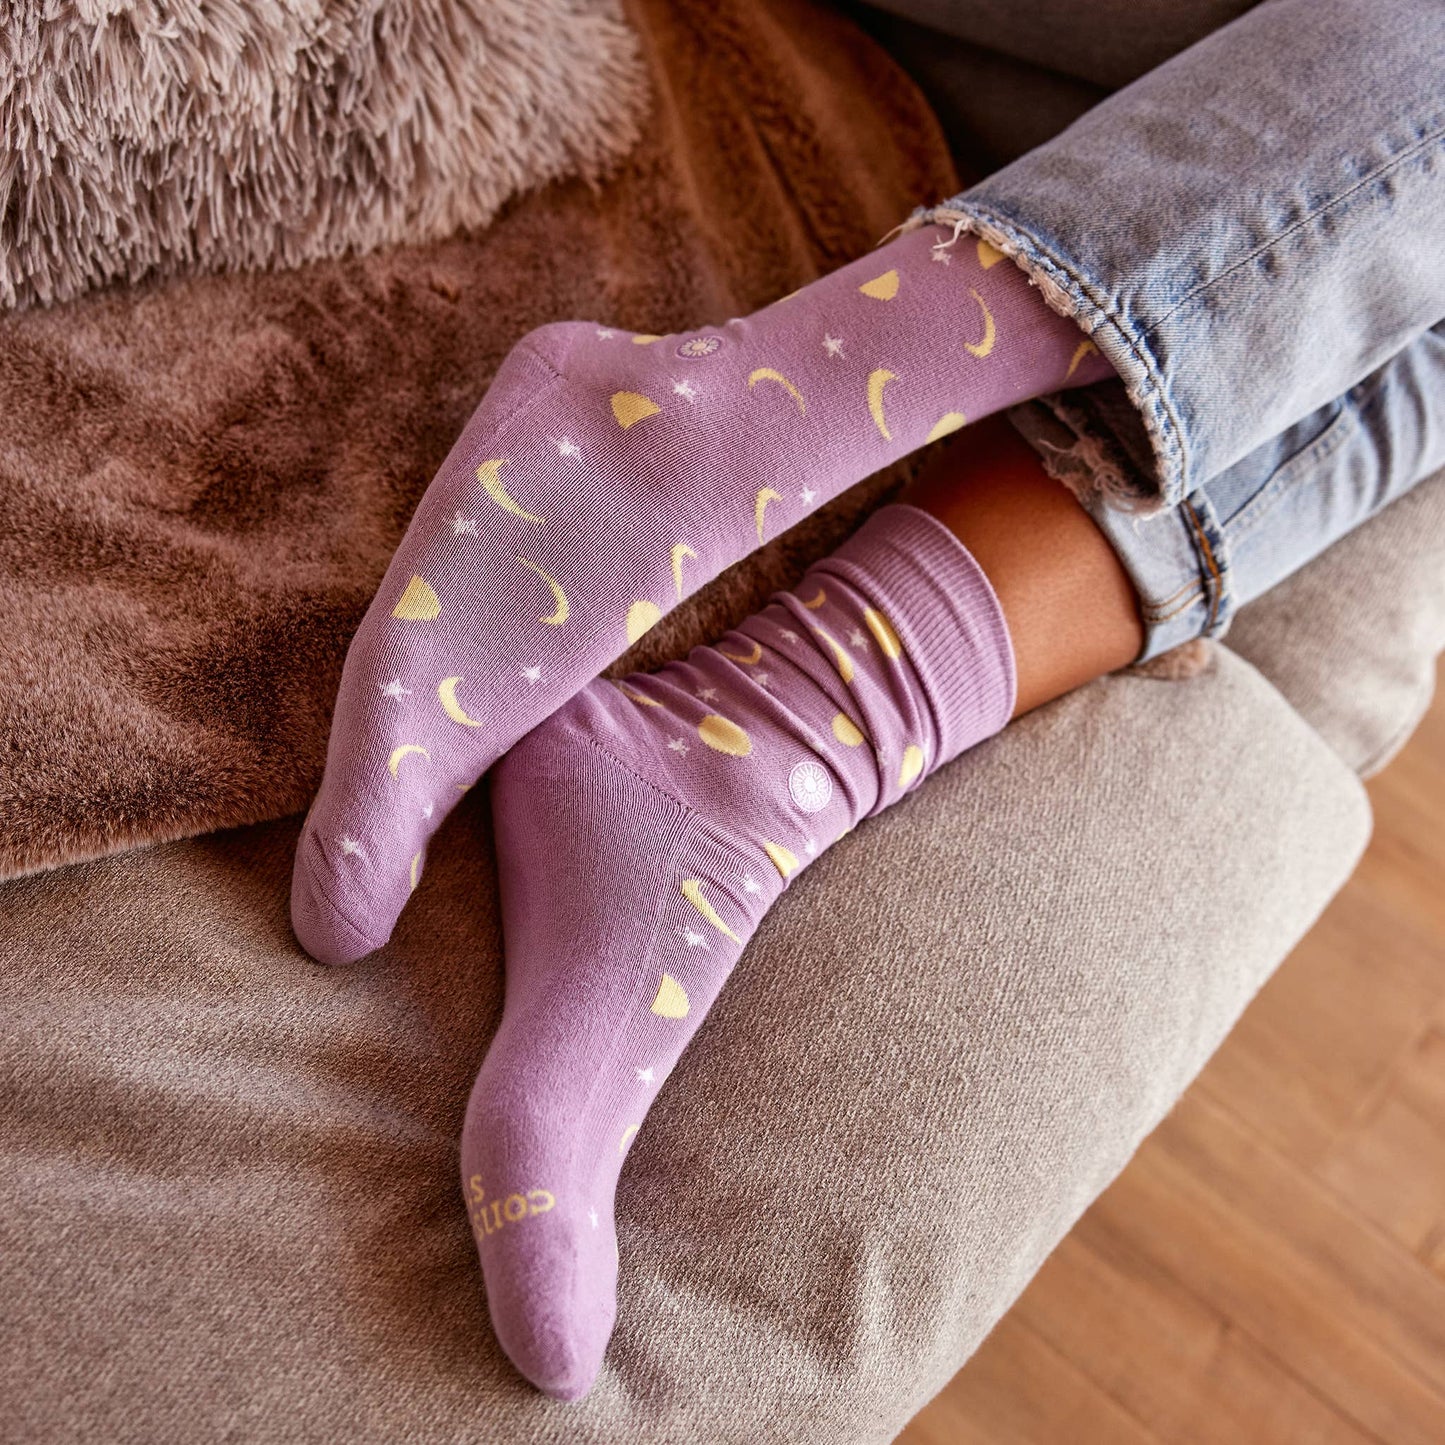 Socks that Support Mental Health (Purple Moons): Small